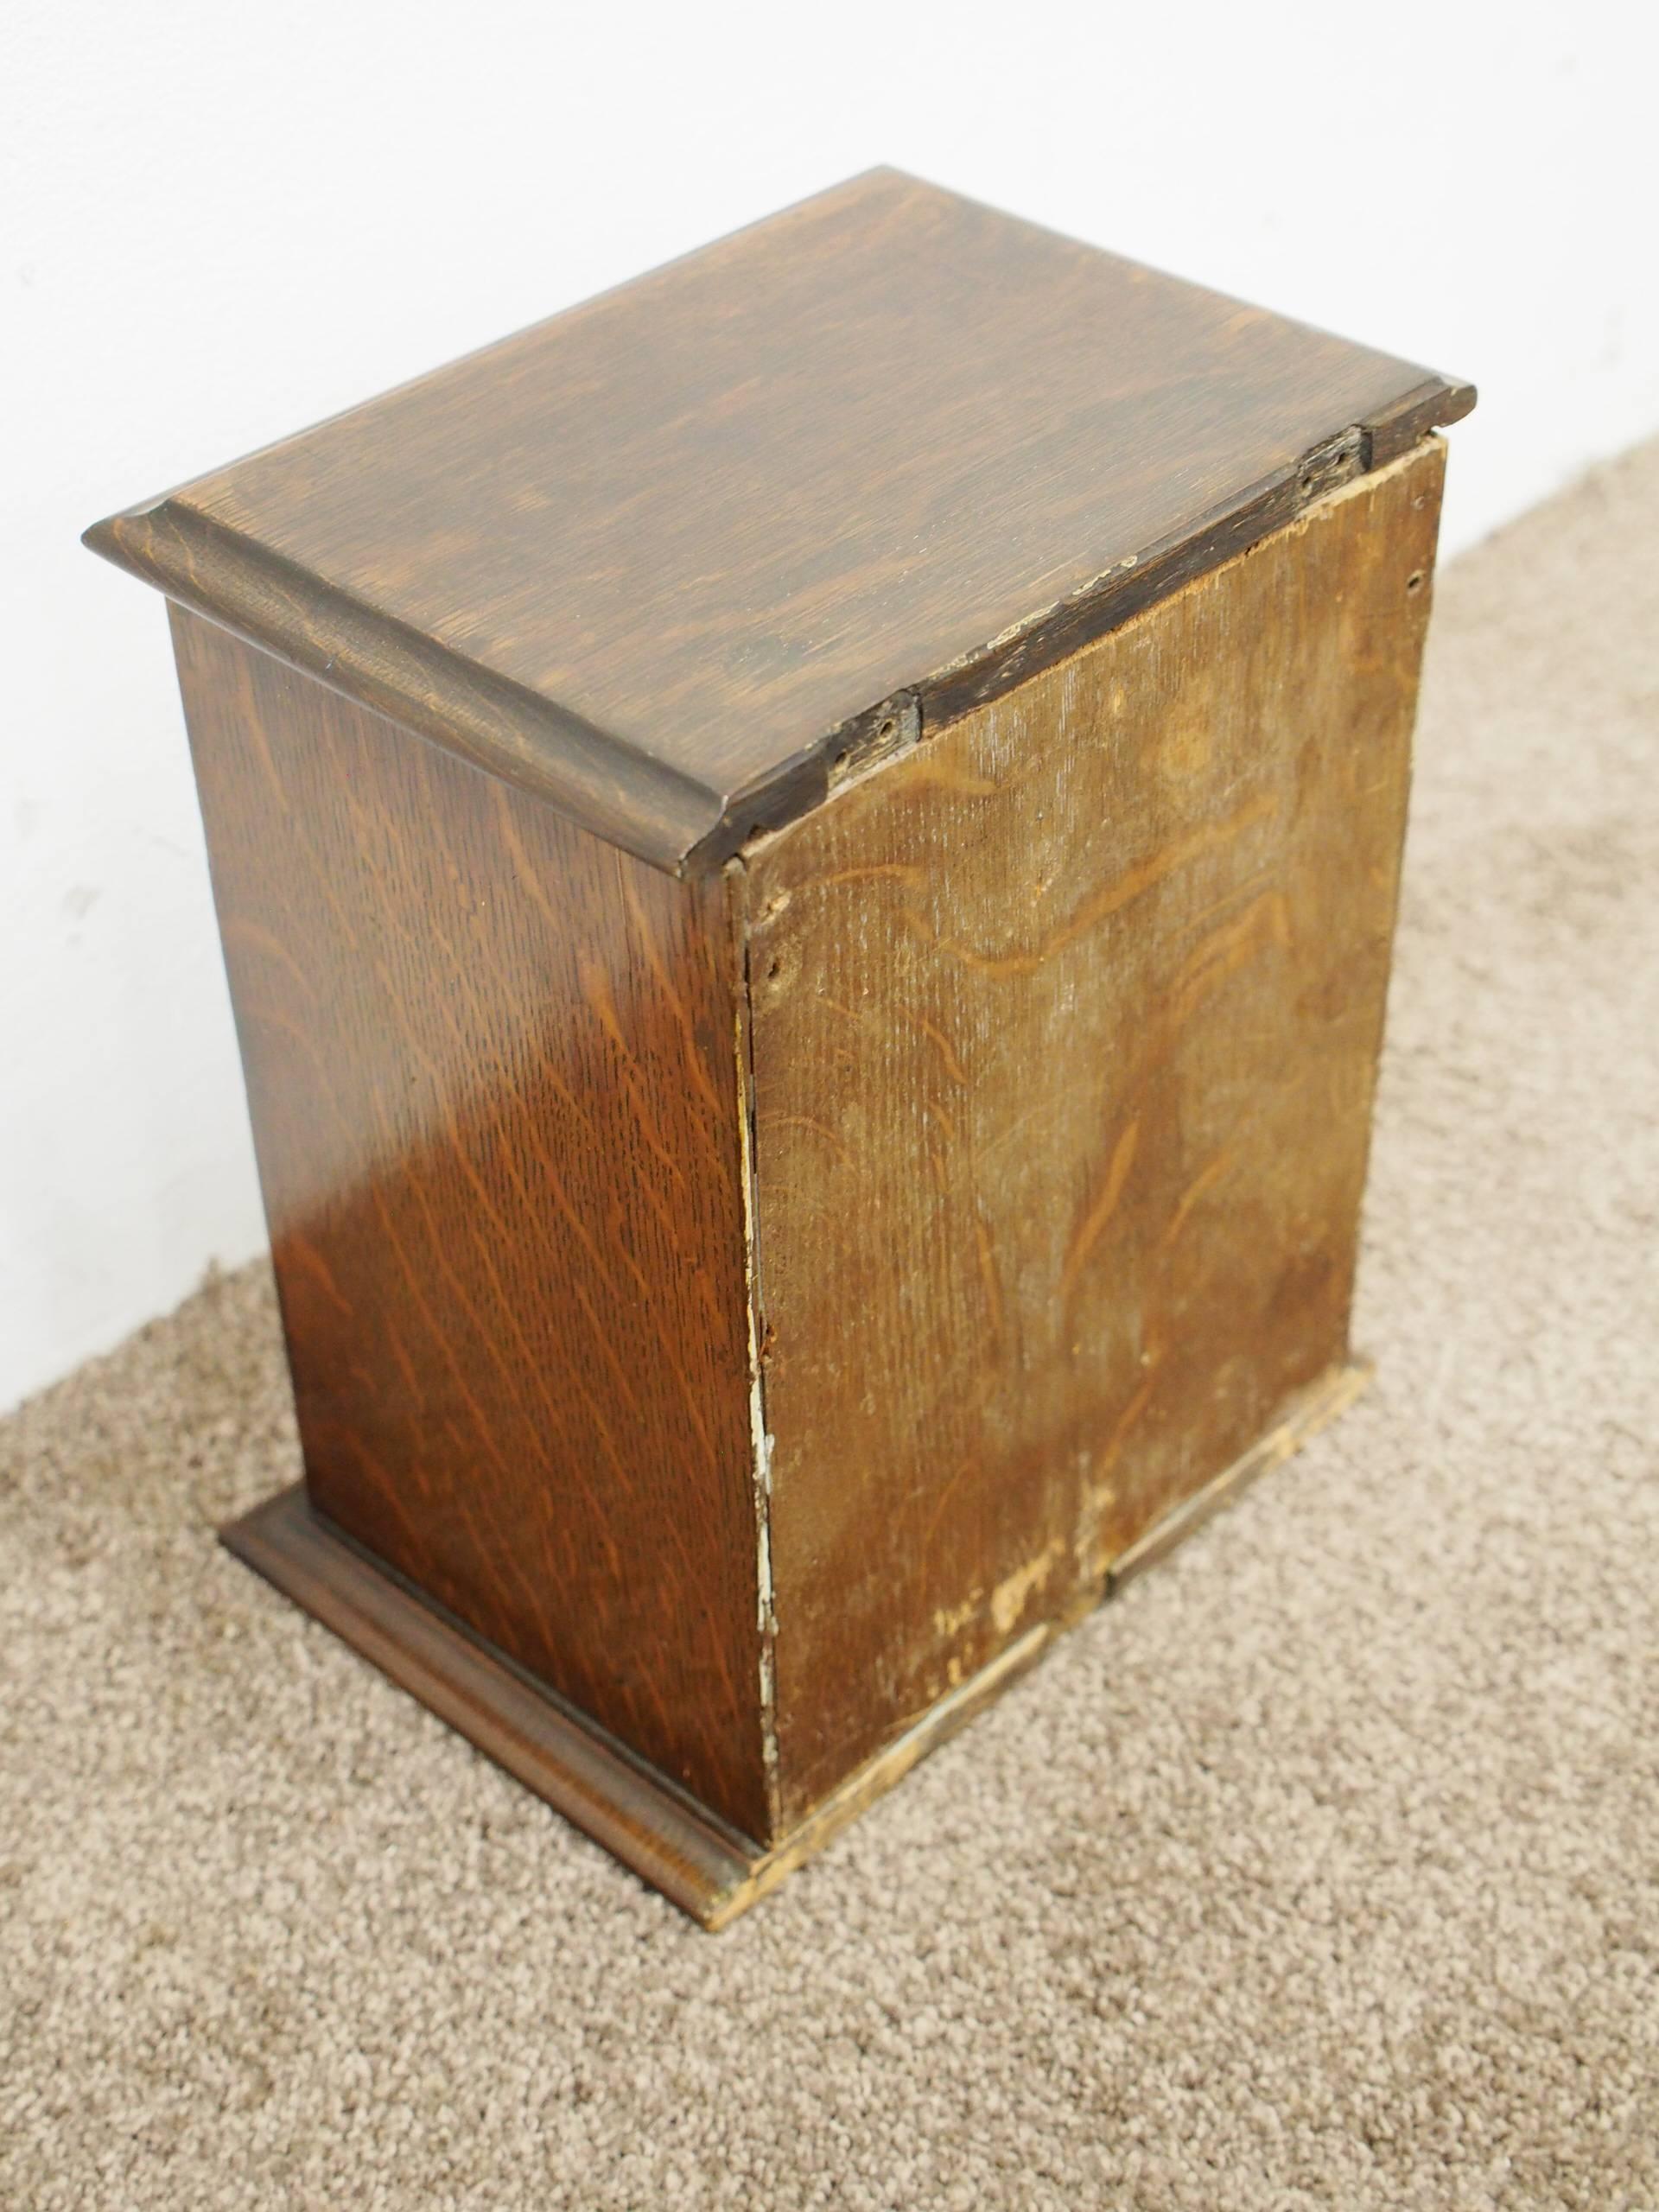 Neat oak and brass Victorian country house or hotel letter box, circa 1880, with a solid top and ogee moulded fore-edge, there is a brass plaque stating ‘letters’, and beneath is large oak door with classic brass strap hinges with Gothic tracing.